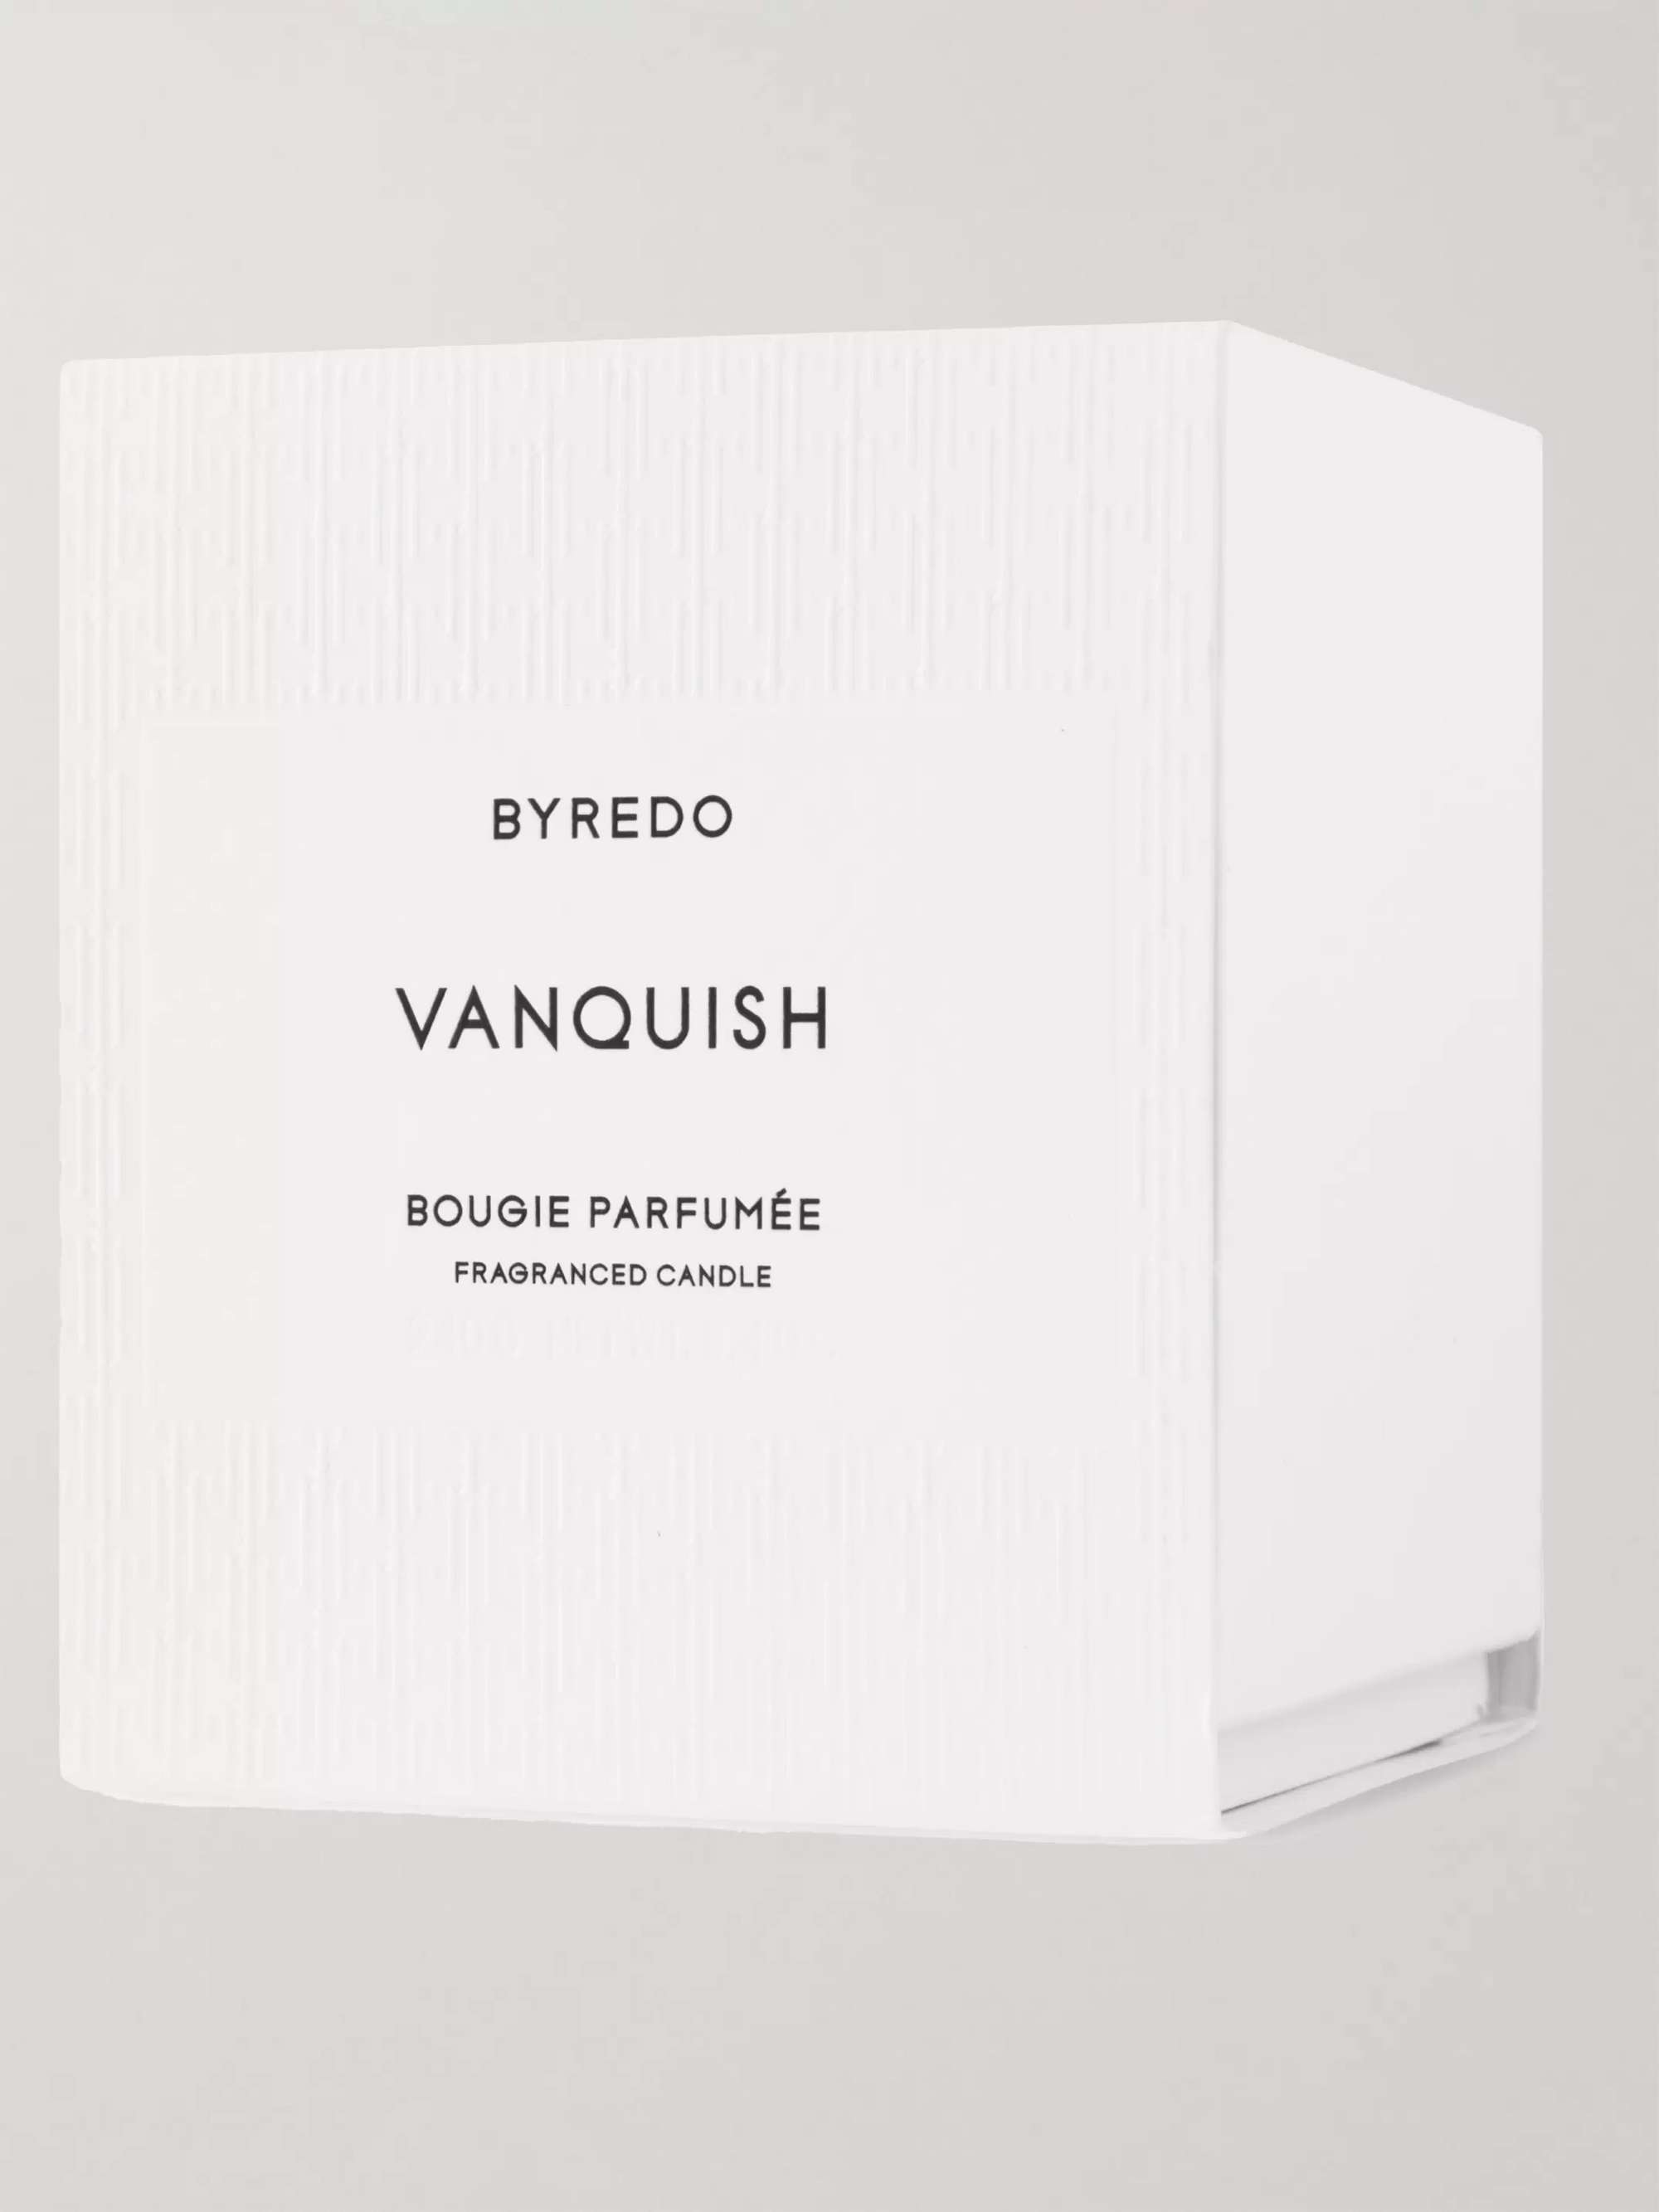 BYREDO Vanquish Scented Candle, 240g